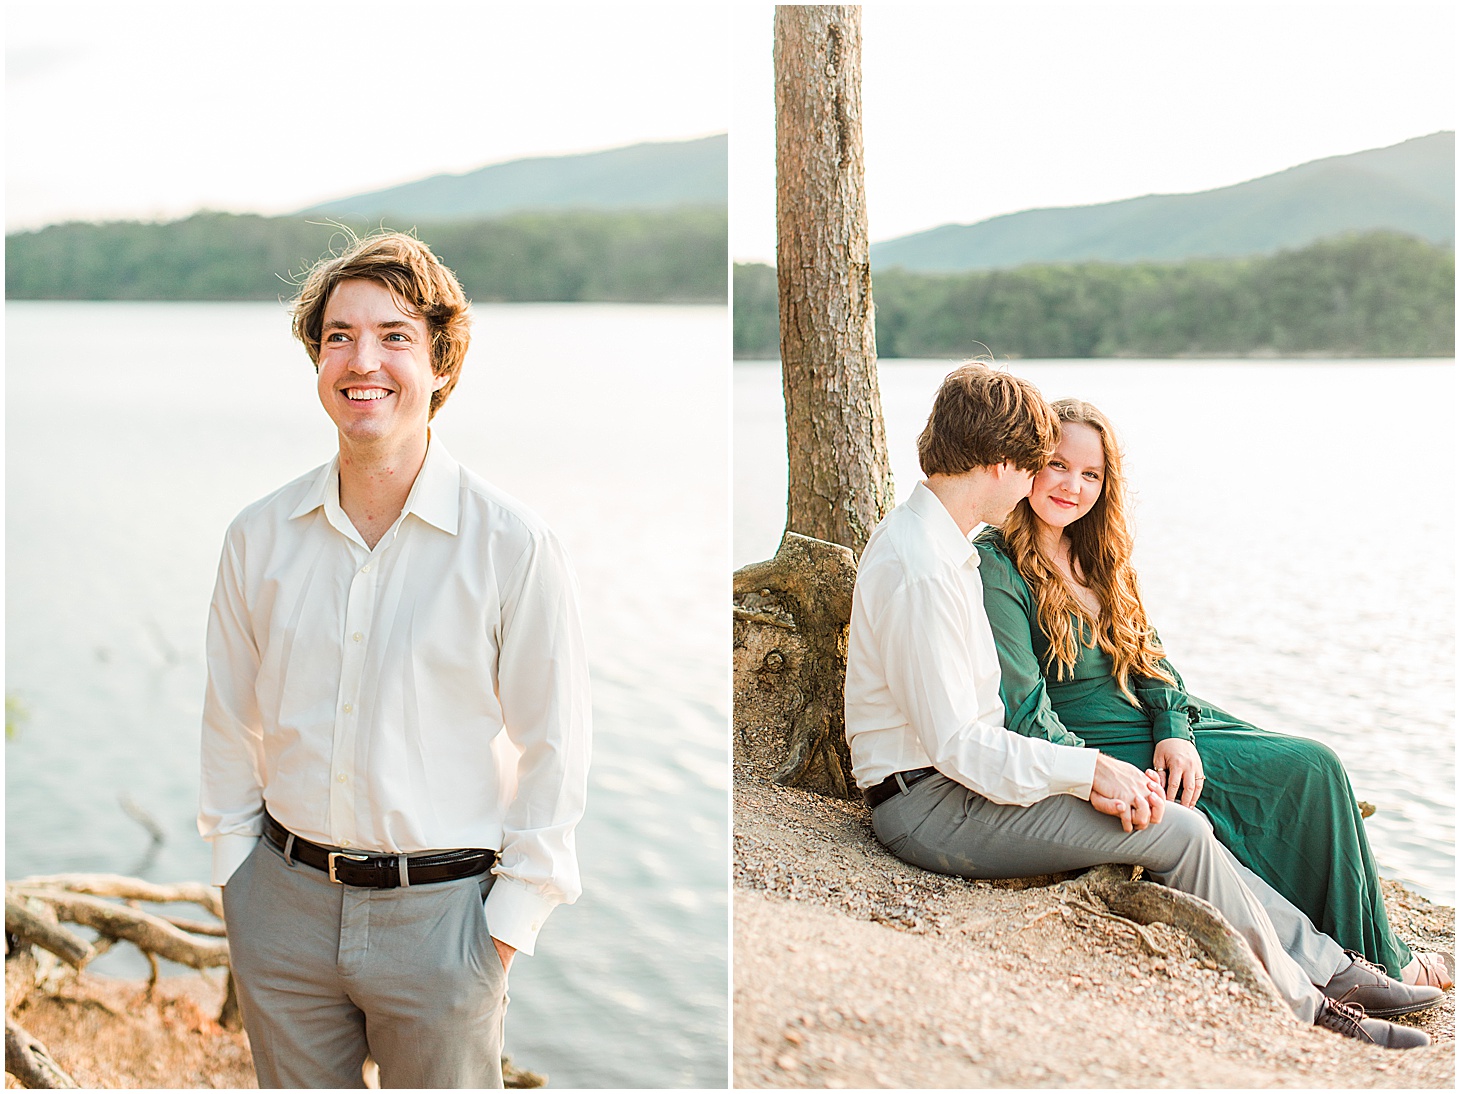 carvinscoveengagementsession_roanokeengagementsession_carvinscove_virginiawedding_virginiaweddingphotographer_vaweddingphotographer_photo_0057.jpg